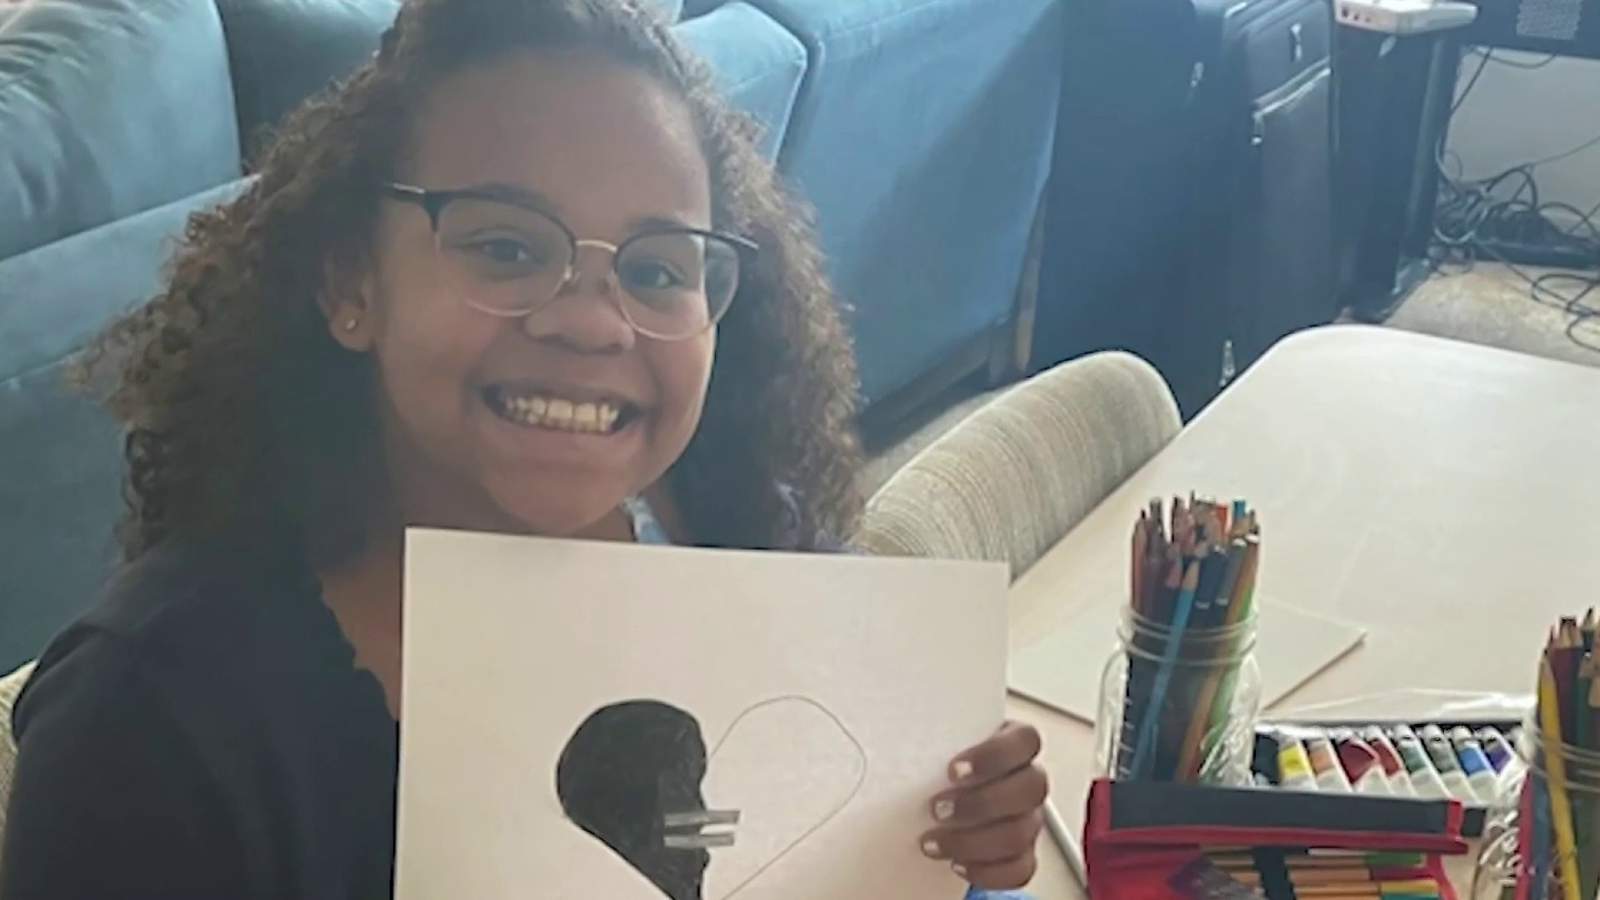 Orlando girl designs pin for police to promote equality ...